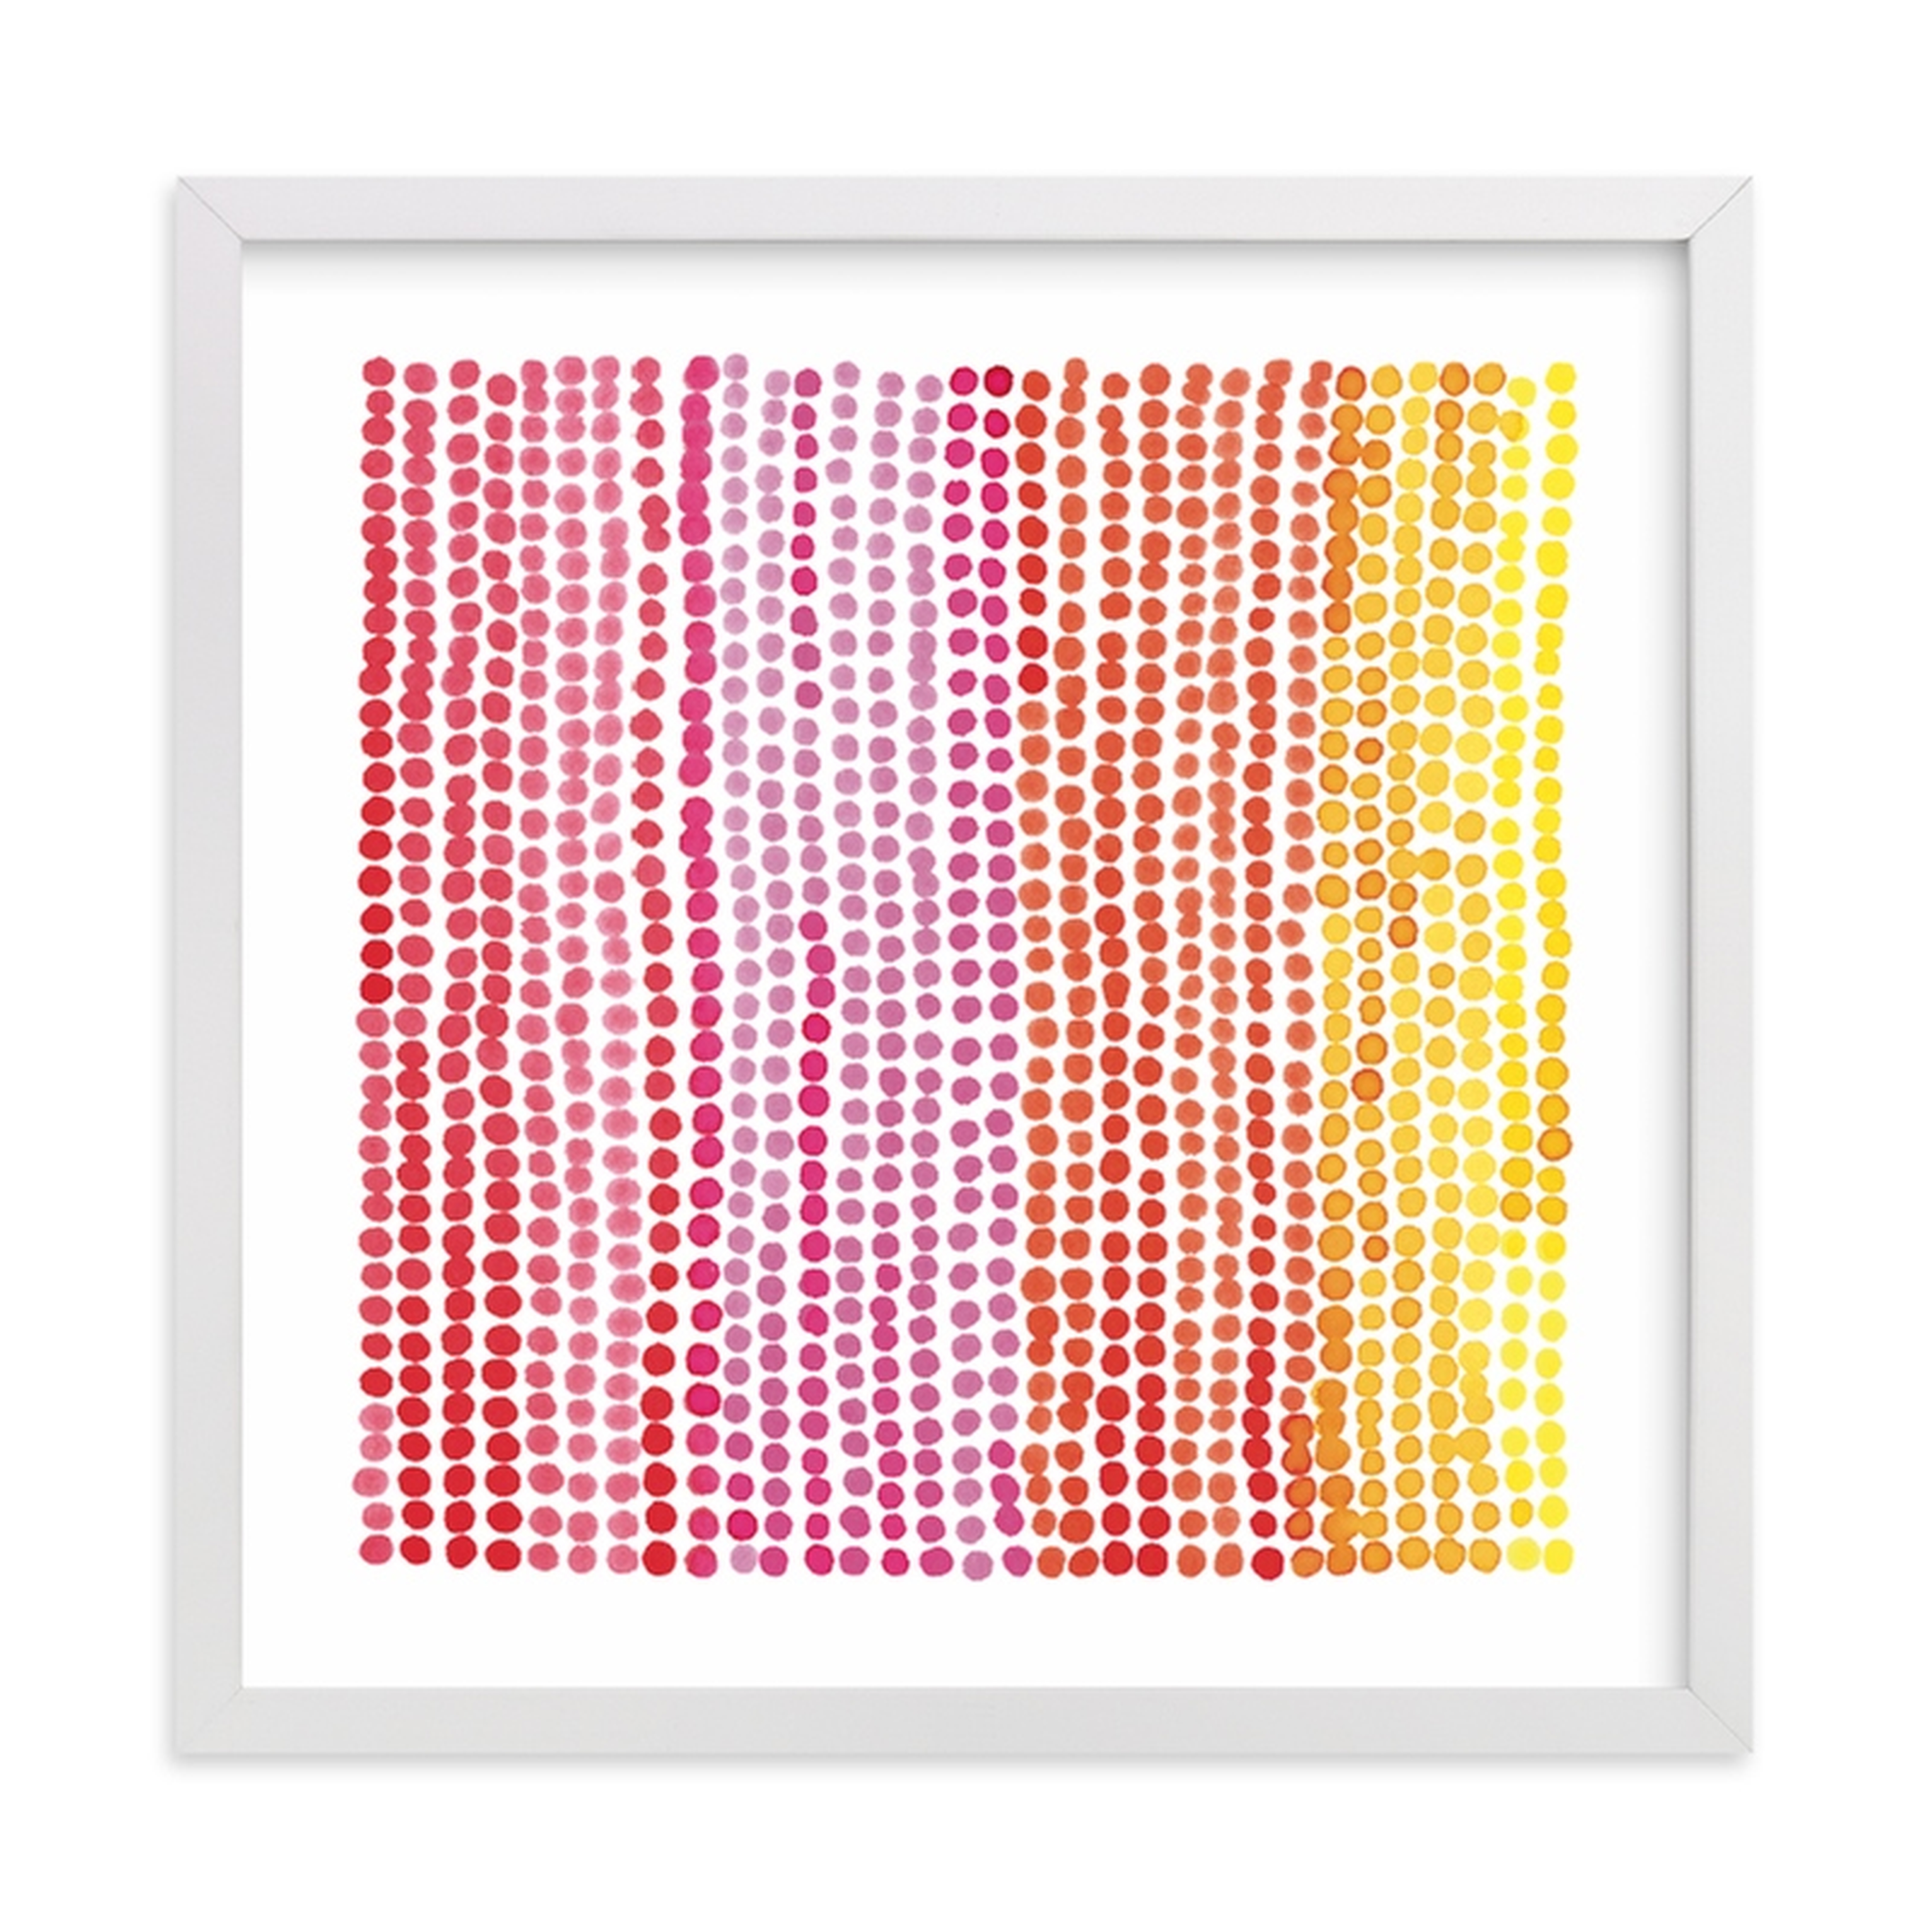 rainbow dots 1  - 11"x11" - classic white frame - Minted